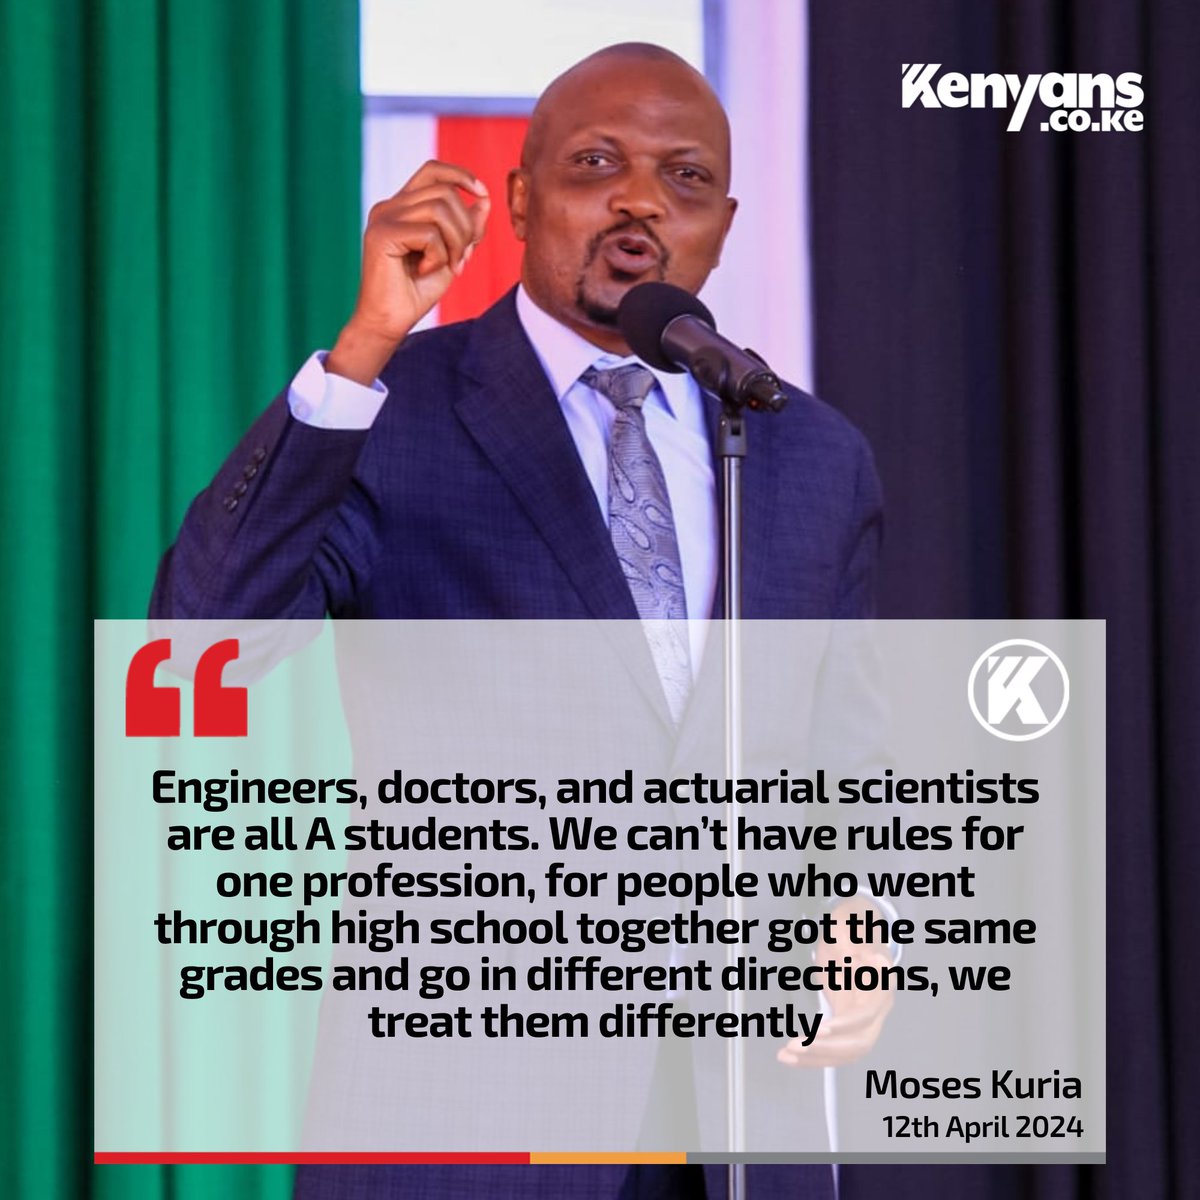 Engineers, doctors, and actuarial scientists are all A students. We can’t have rules for one profession - Moses Kuria